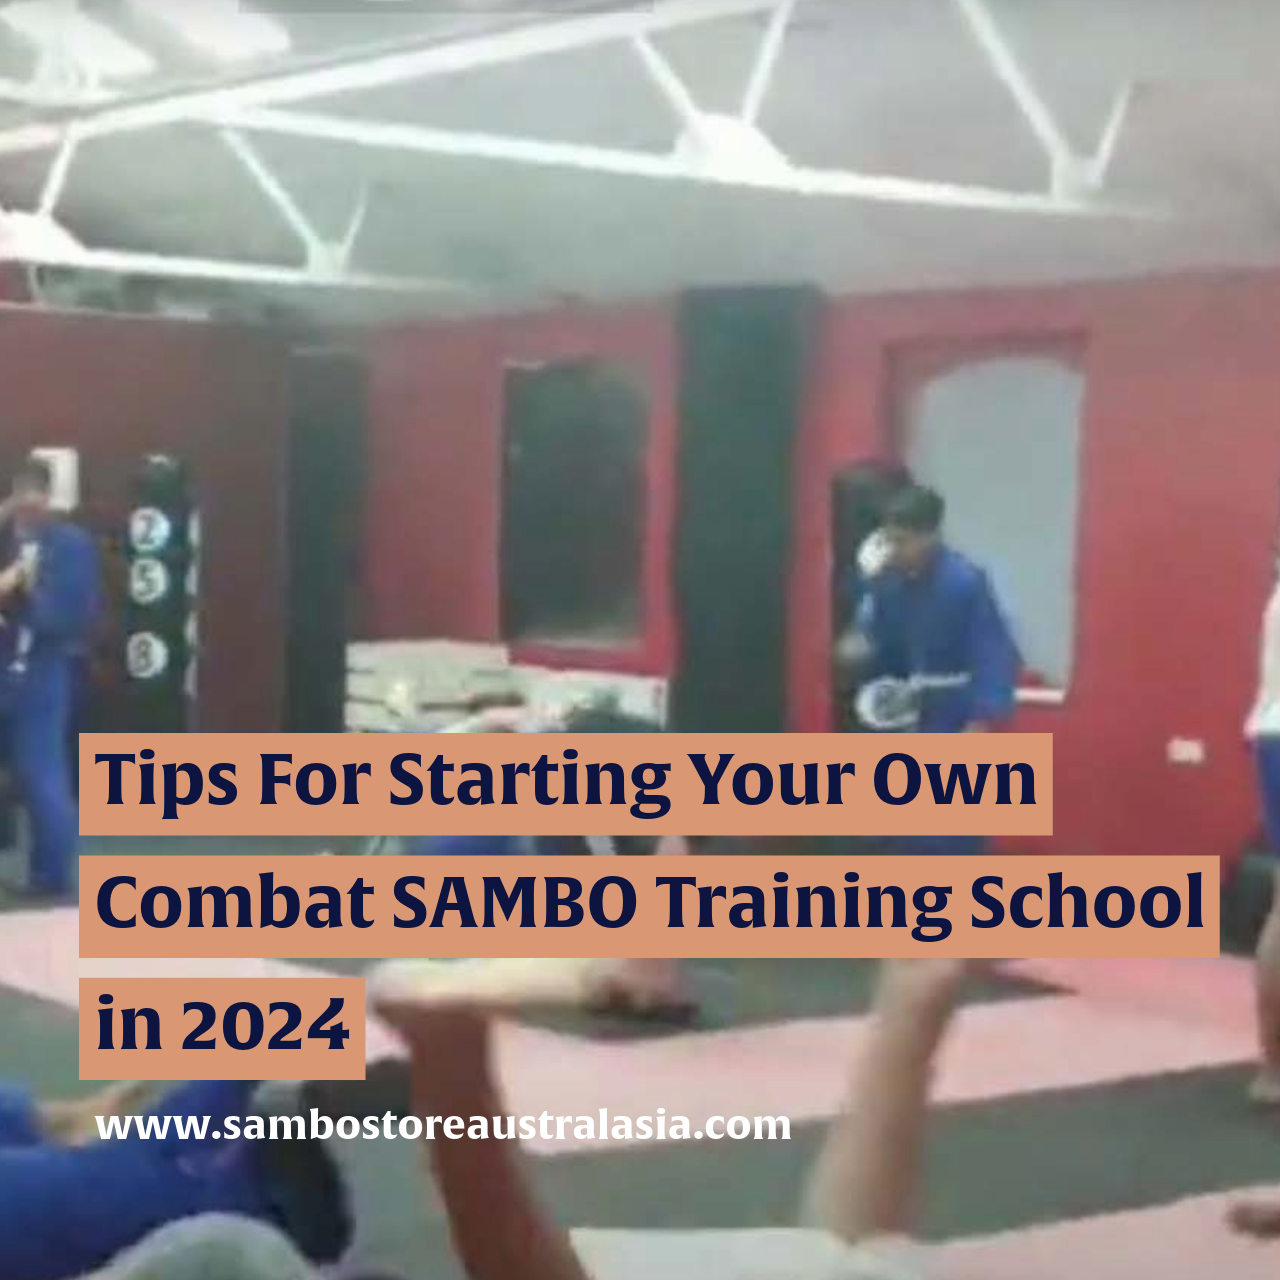 Tips For Starting Your Own Combat SAMBO Training School in 2024